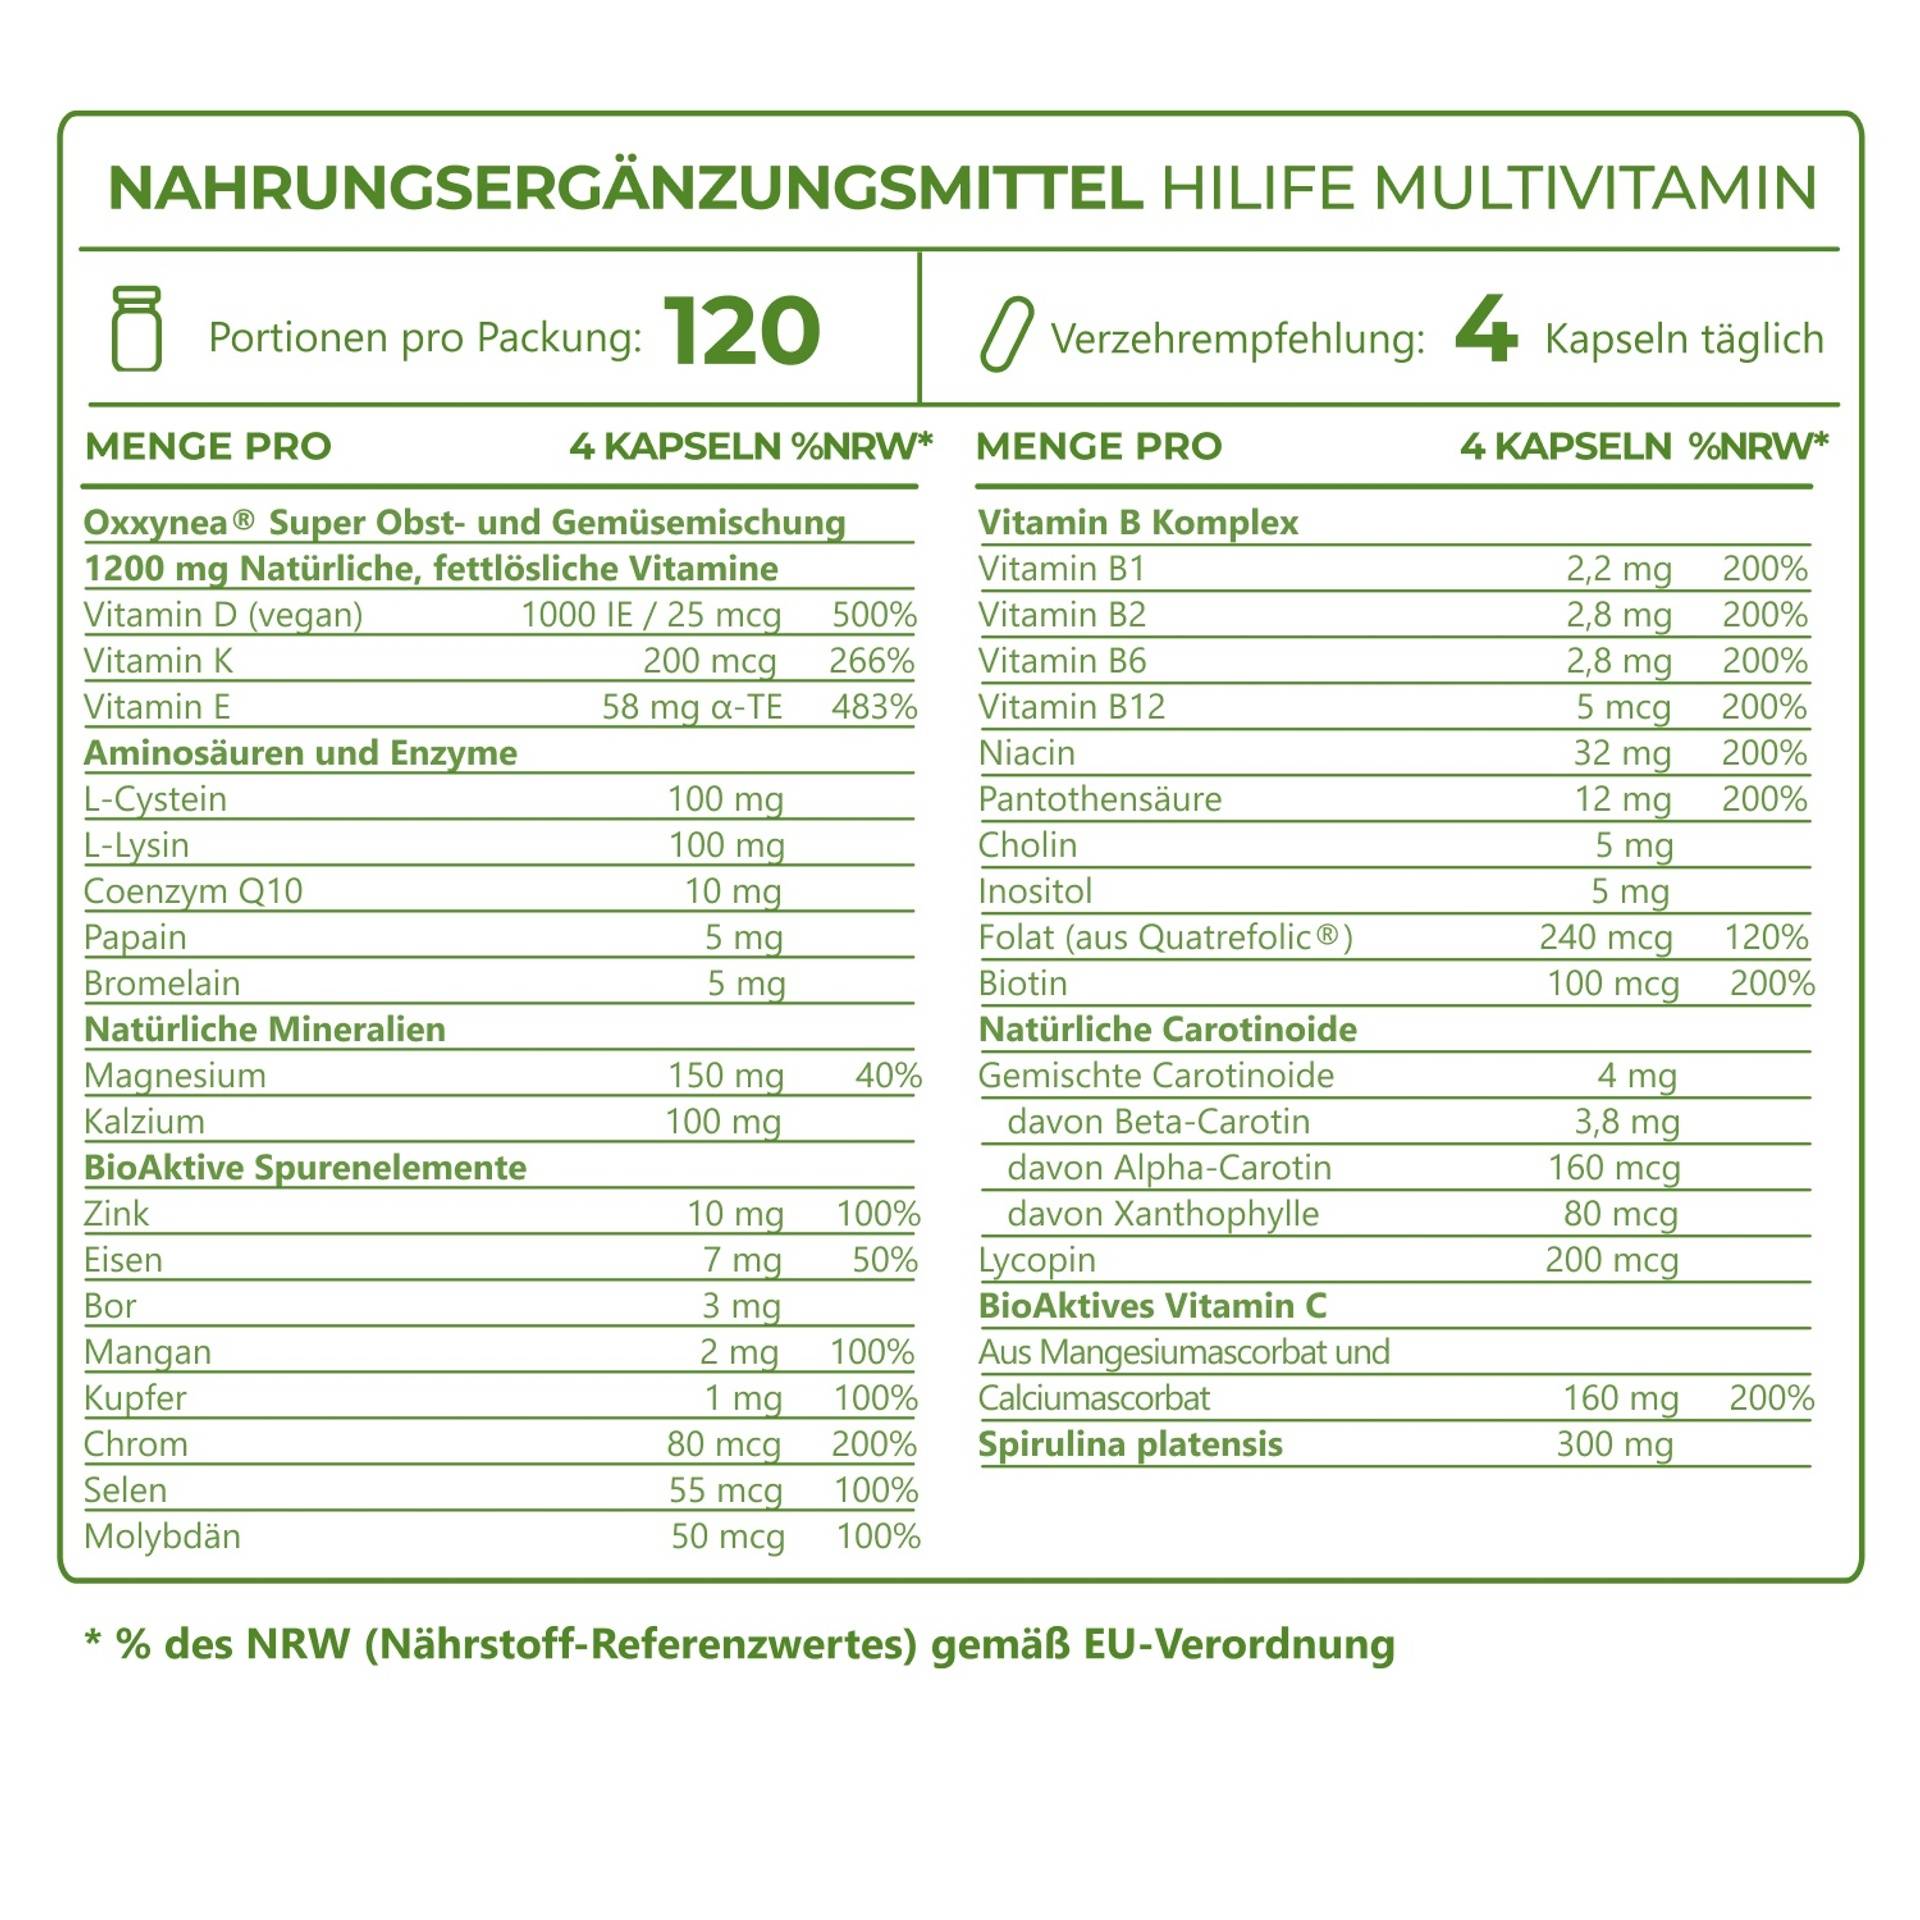 5_Ingredients_Hilife Multivitamin_6900-04.png